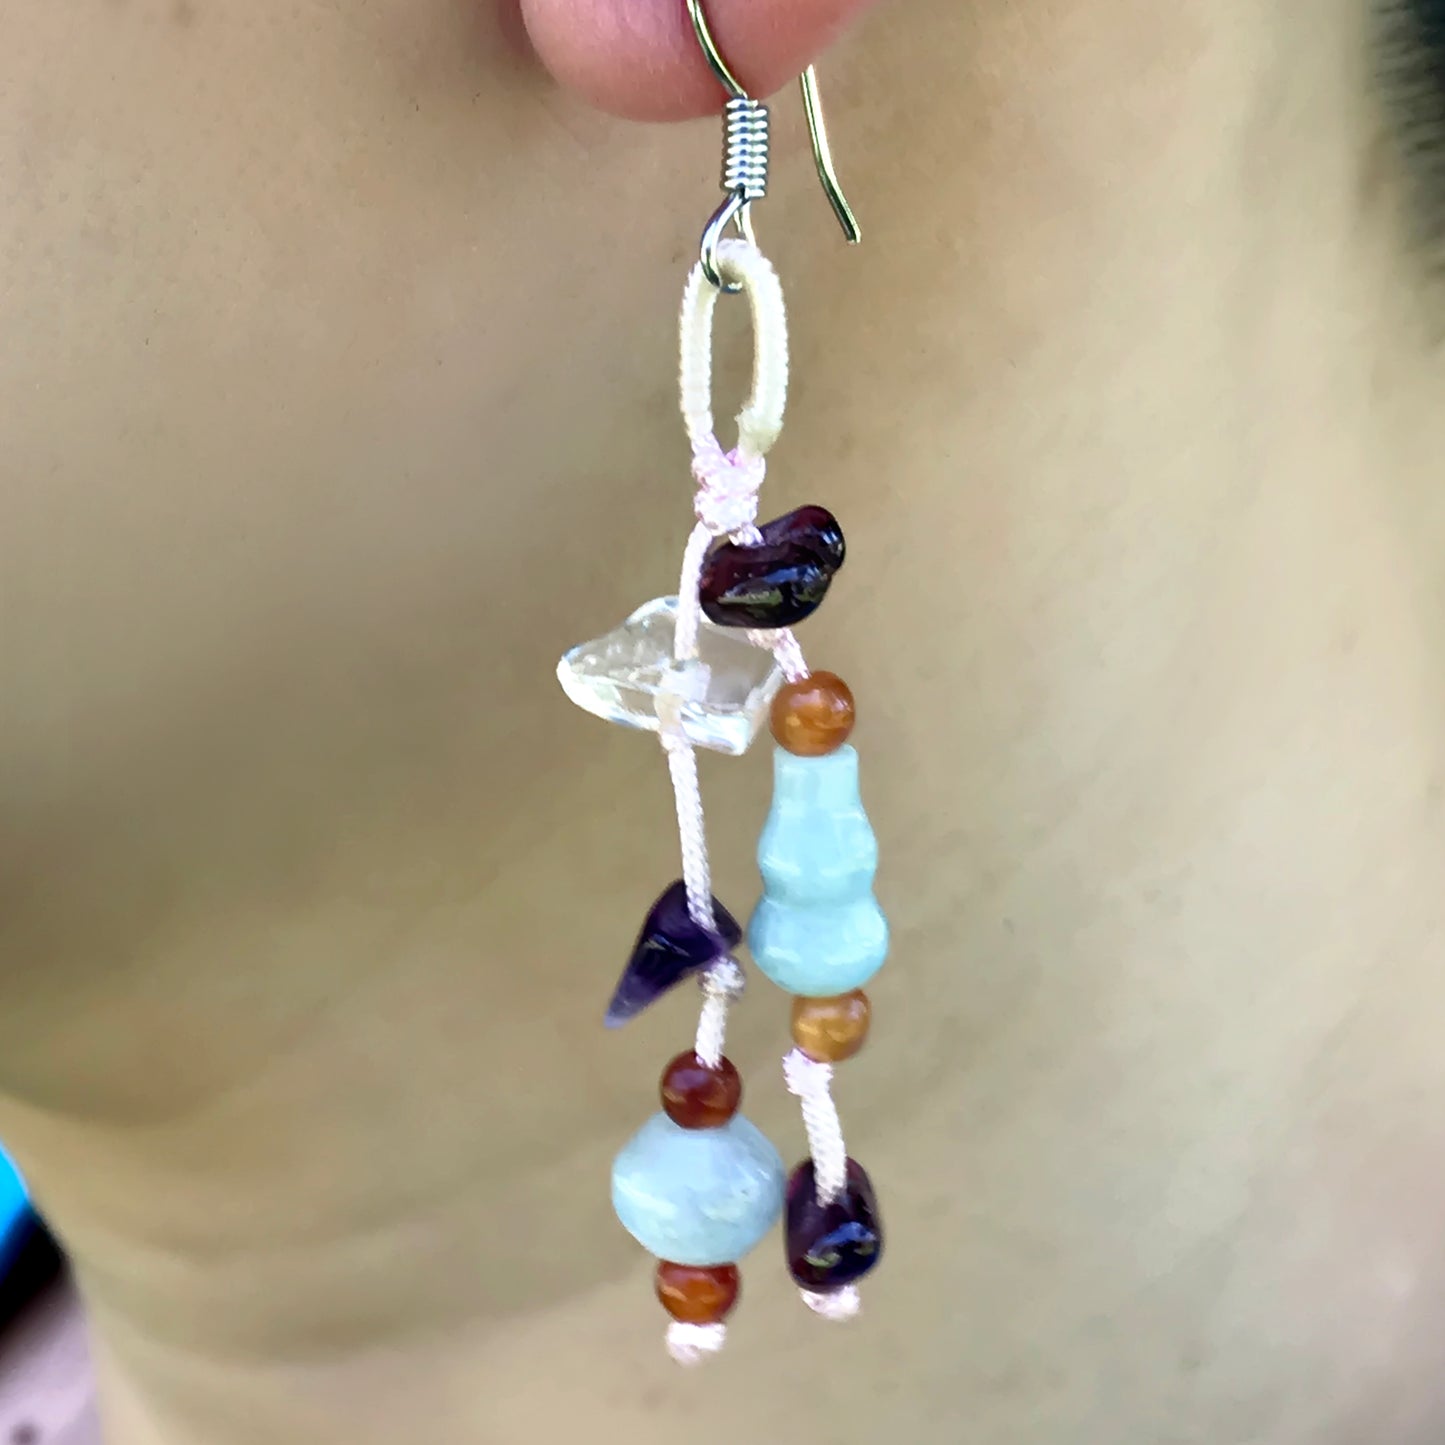 Add a Touch of Magic with Fairy Vase Gemstones Earrings